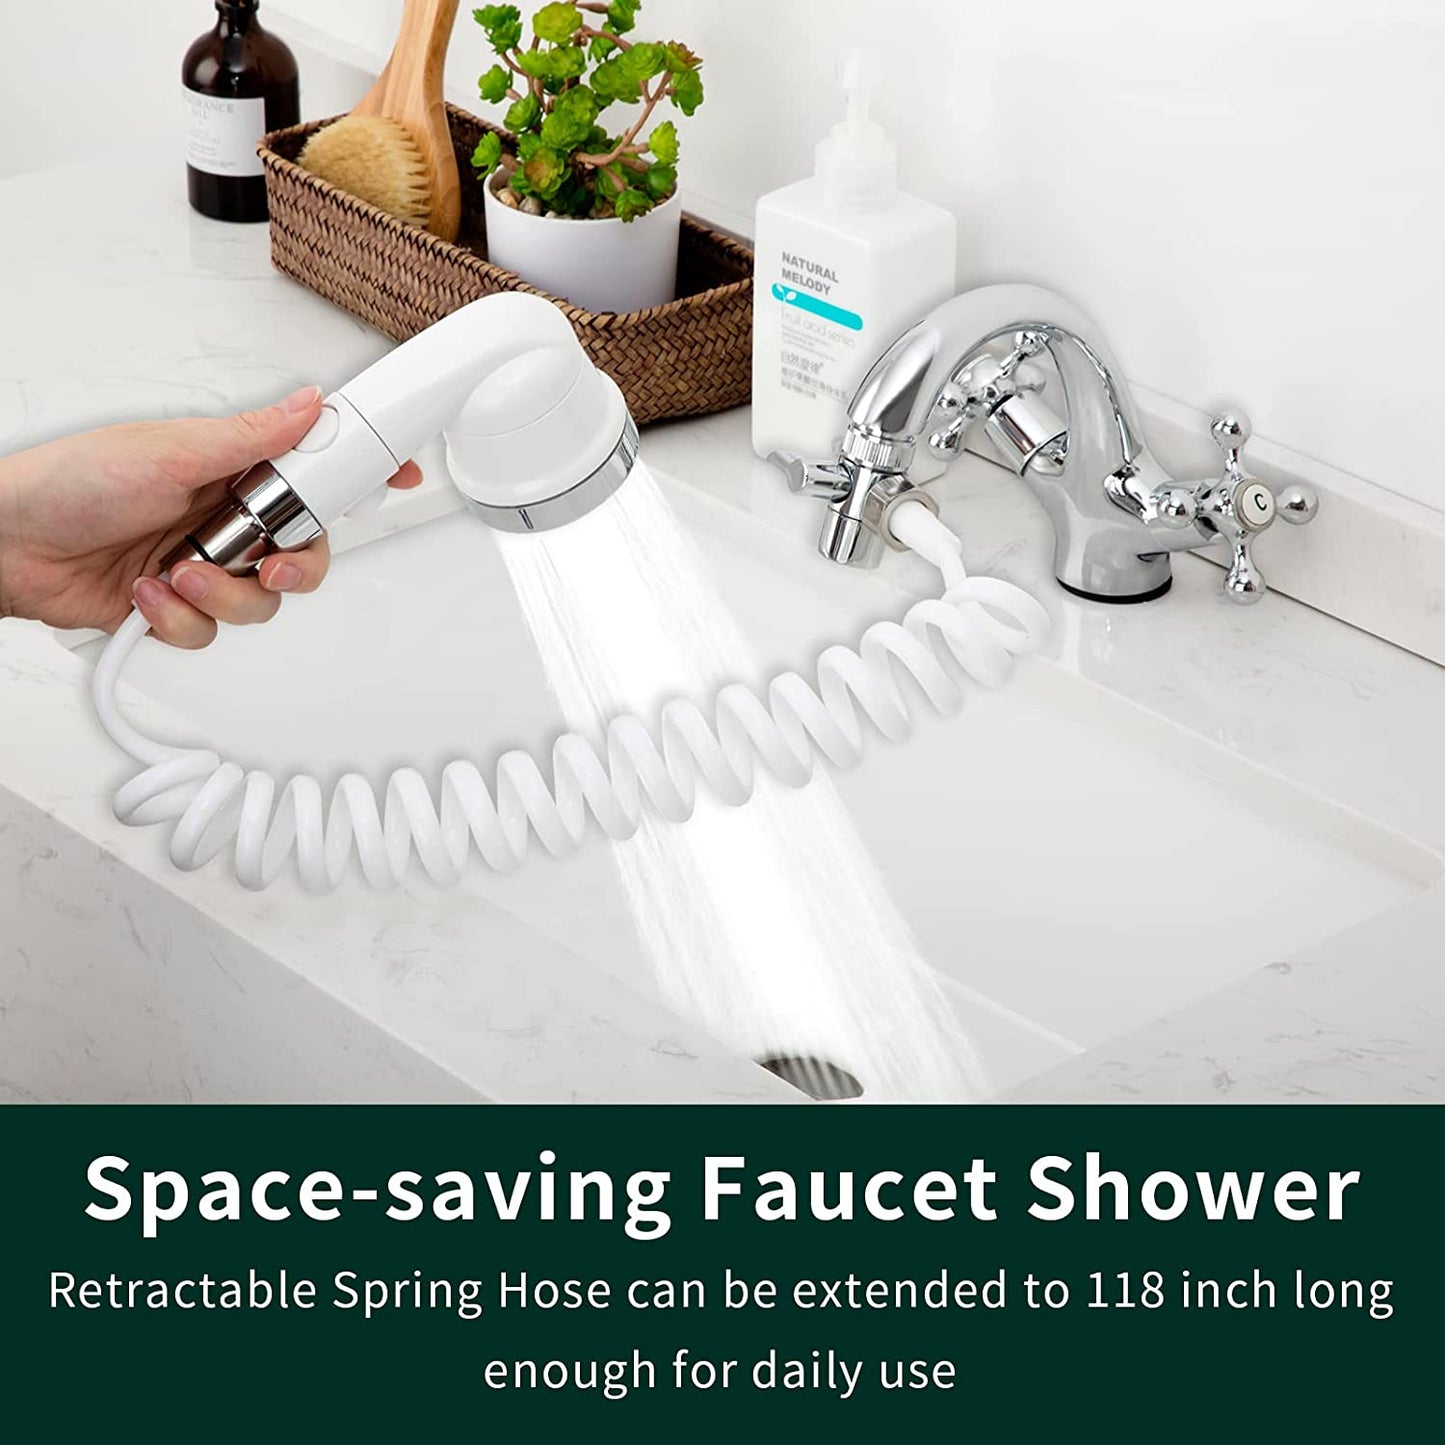 Sink Faucet Sprayer Attachment, Shower Head Attaches to Tub Faucet, Dog Bathing Hose Shower Set for Laundry Bathroom Kitchen